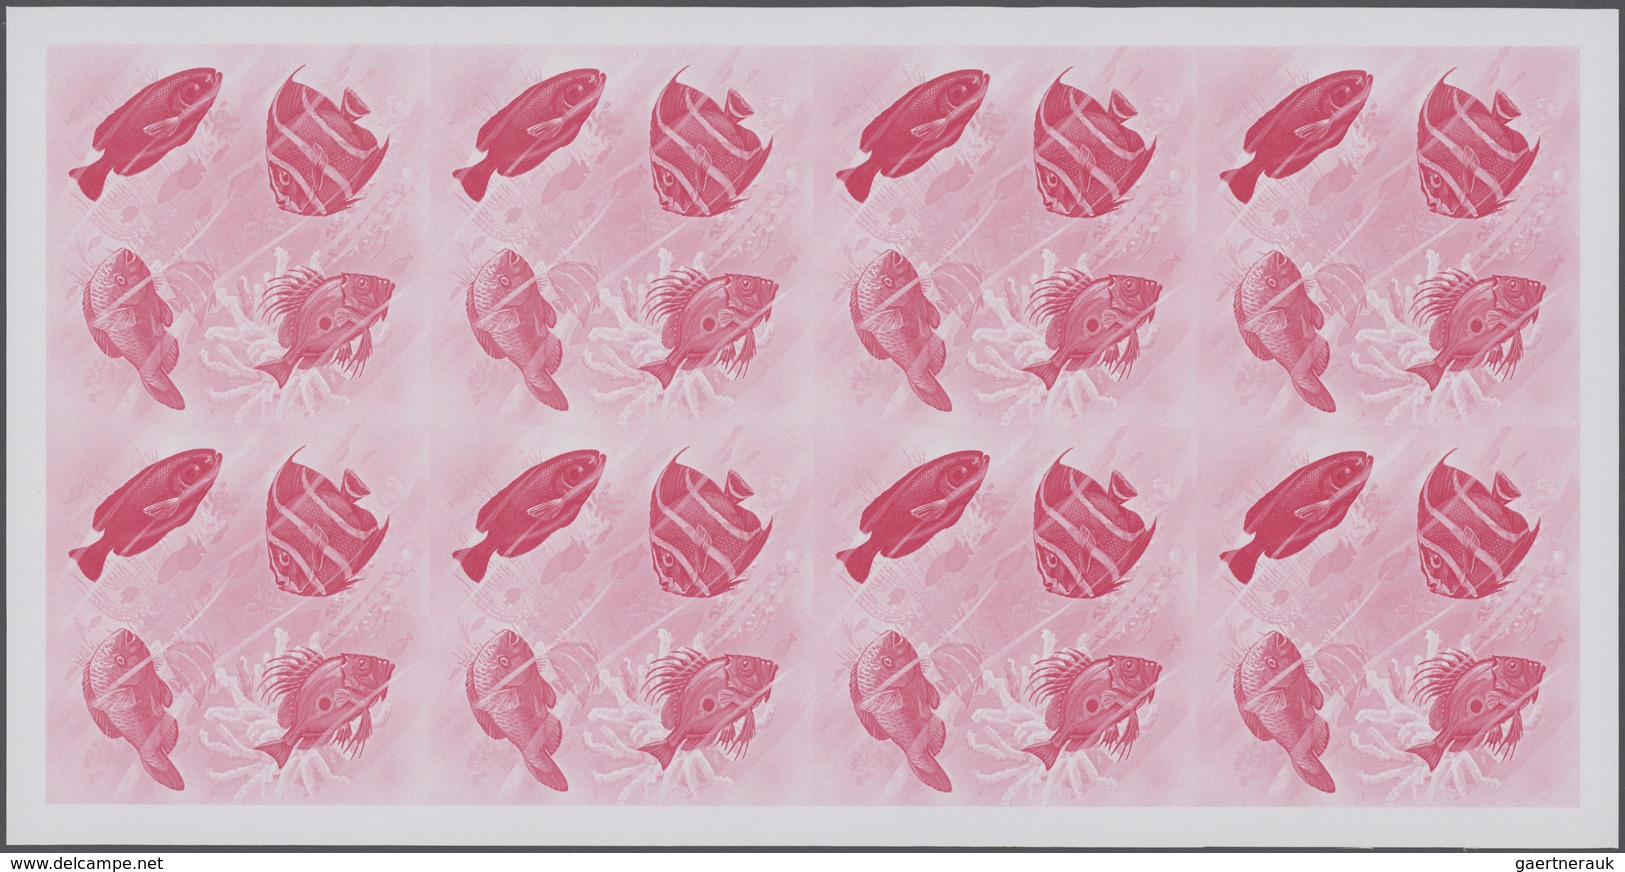 Thematik: Tiere-Fische / animals-fishes: 1974, Burundi. Progressive proofs set of sheets for the air